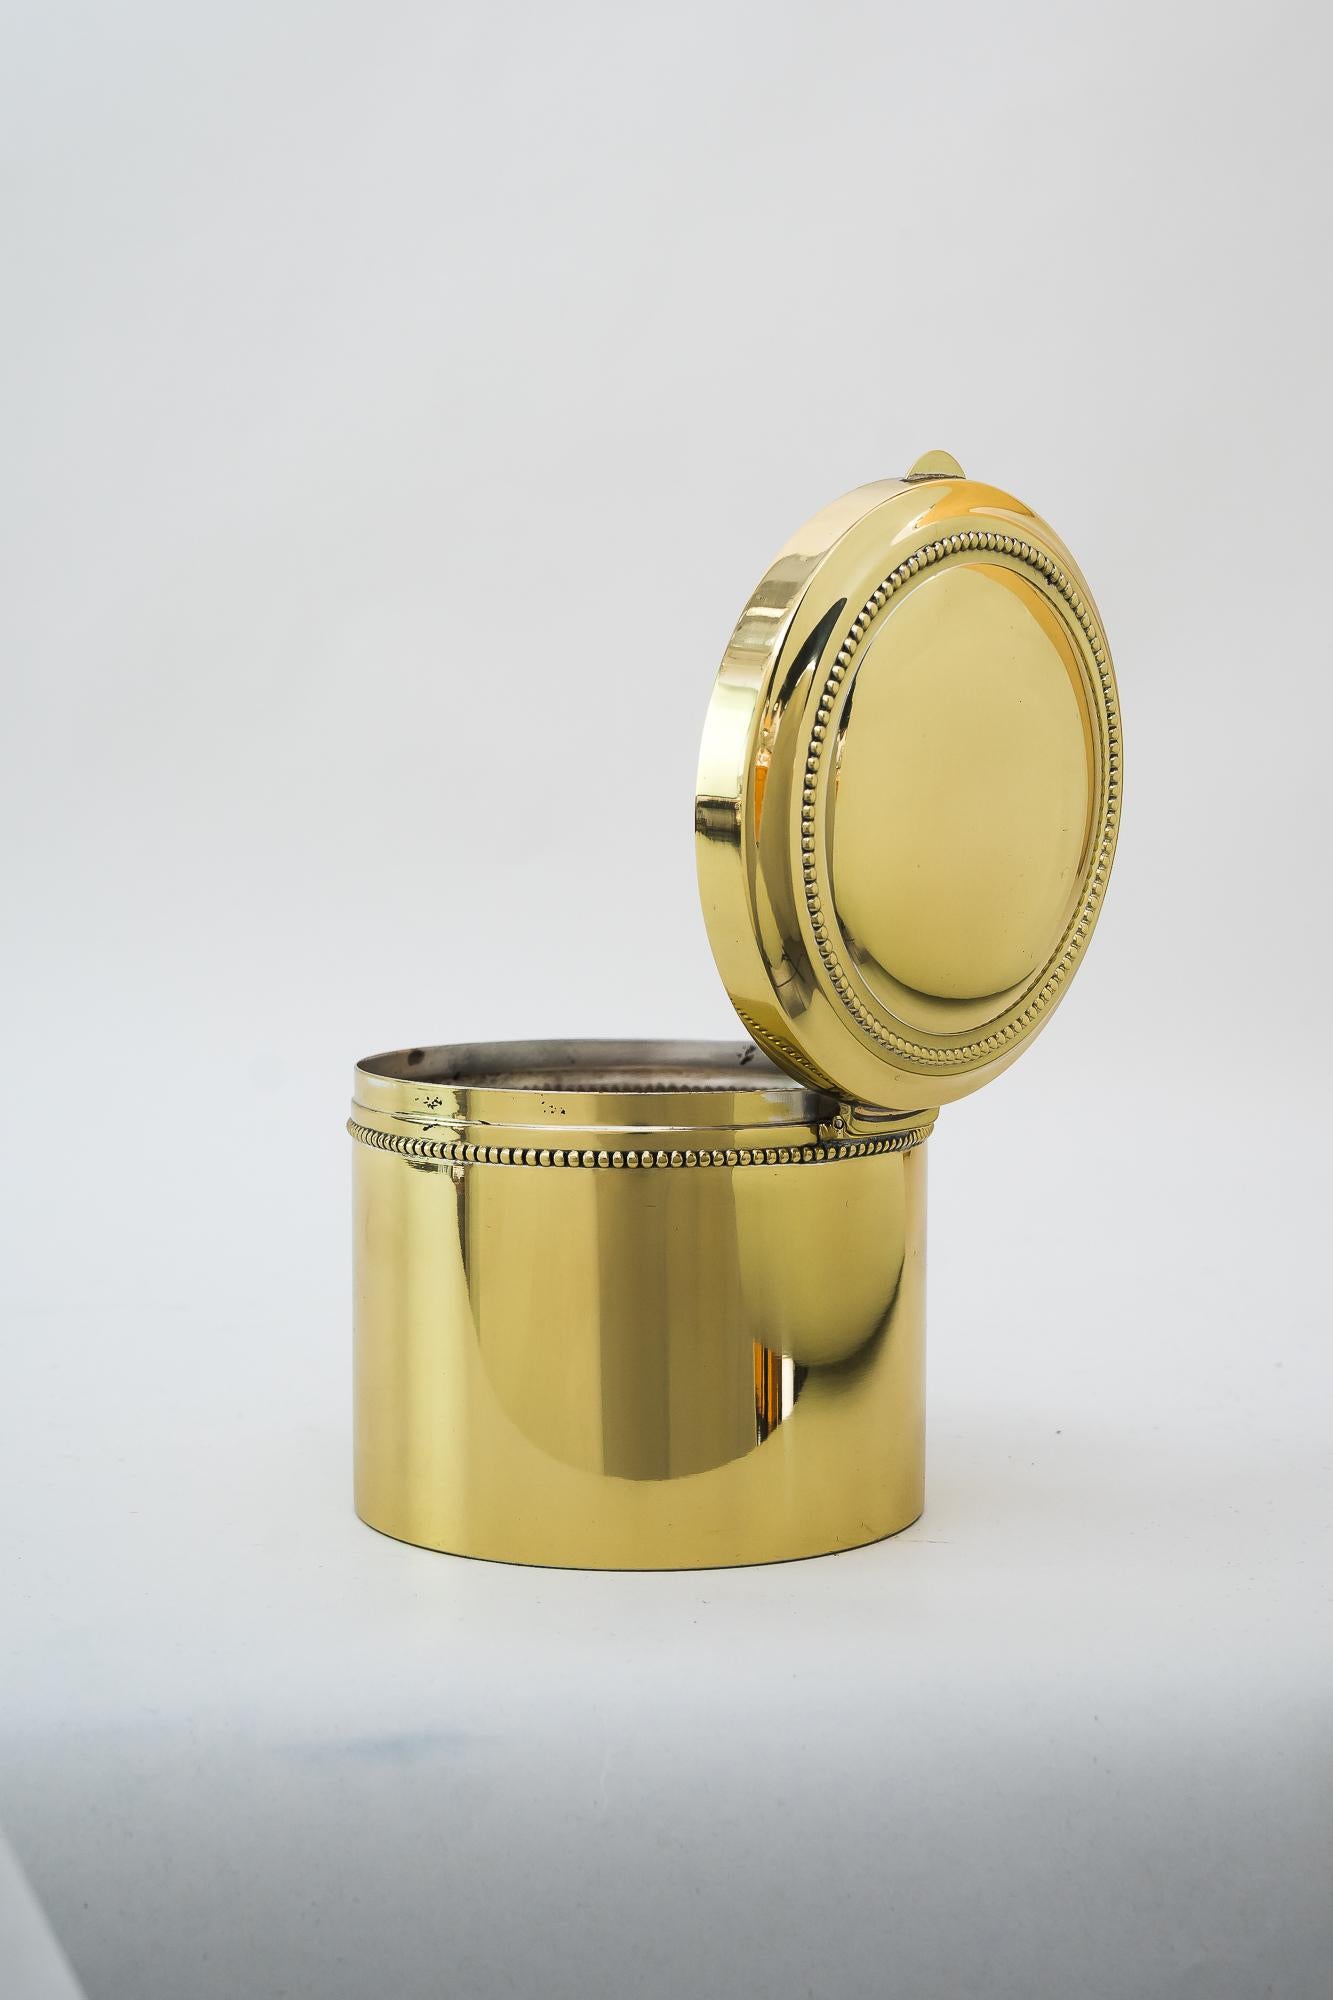 Art Deco round jewelry box, circa 1920s
Polished and stove enameled.